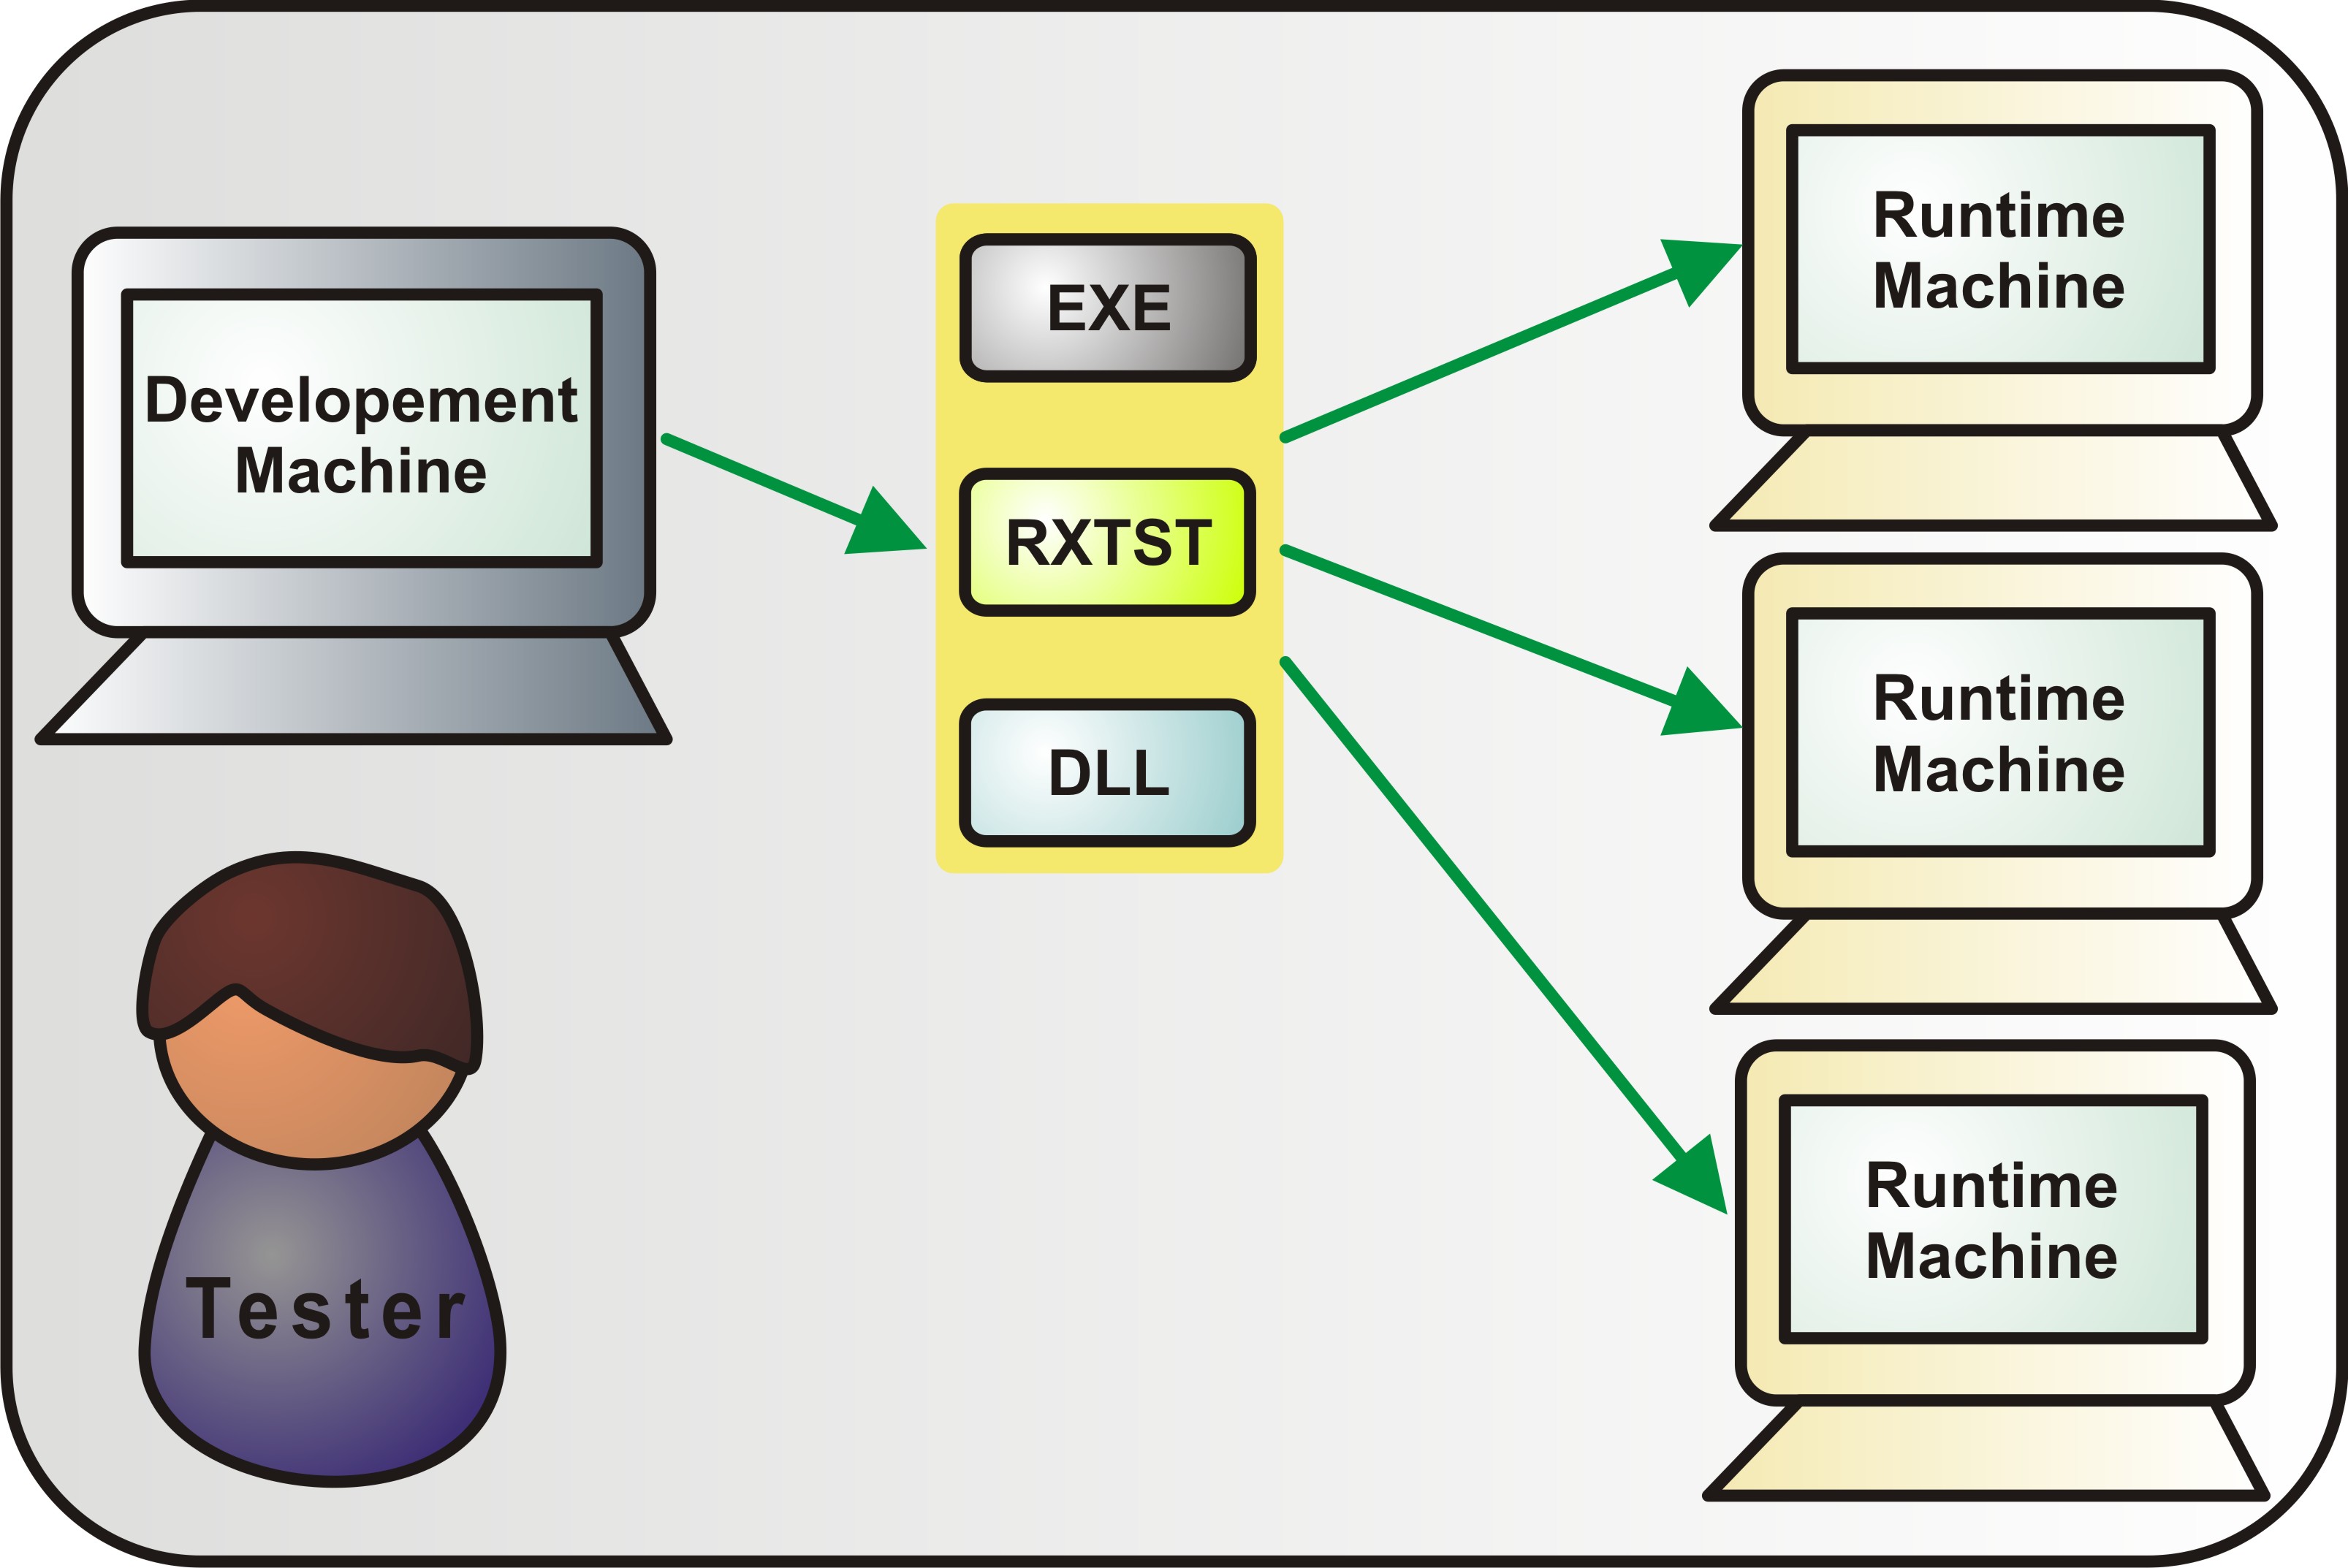 Execution on Runtime Machines